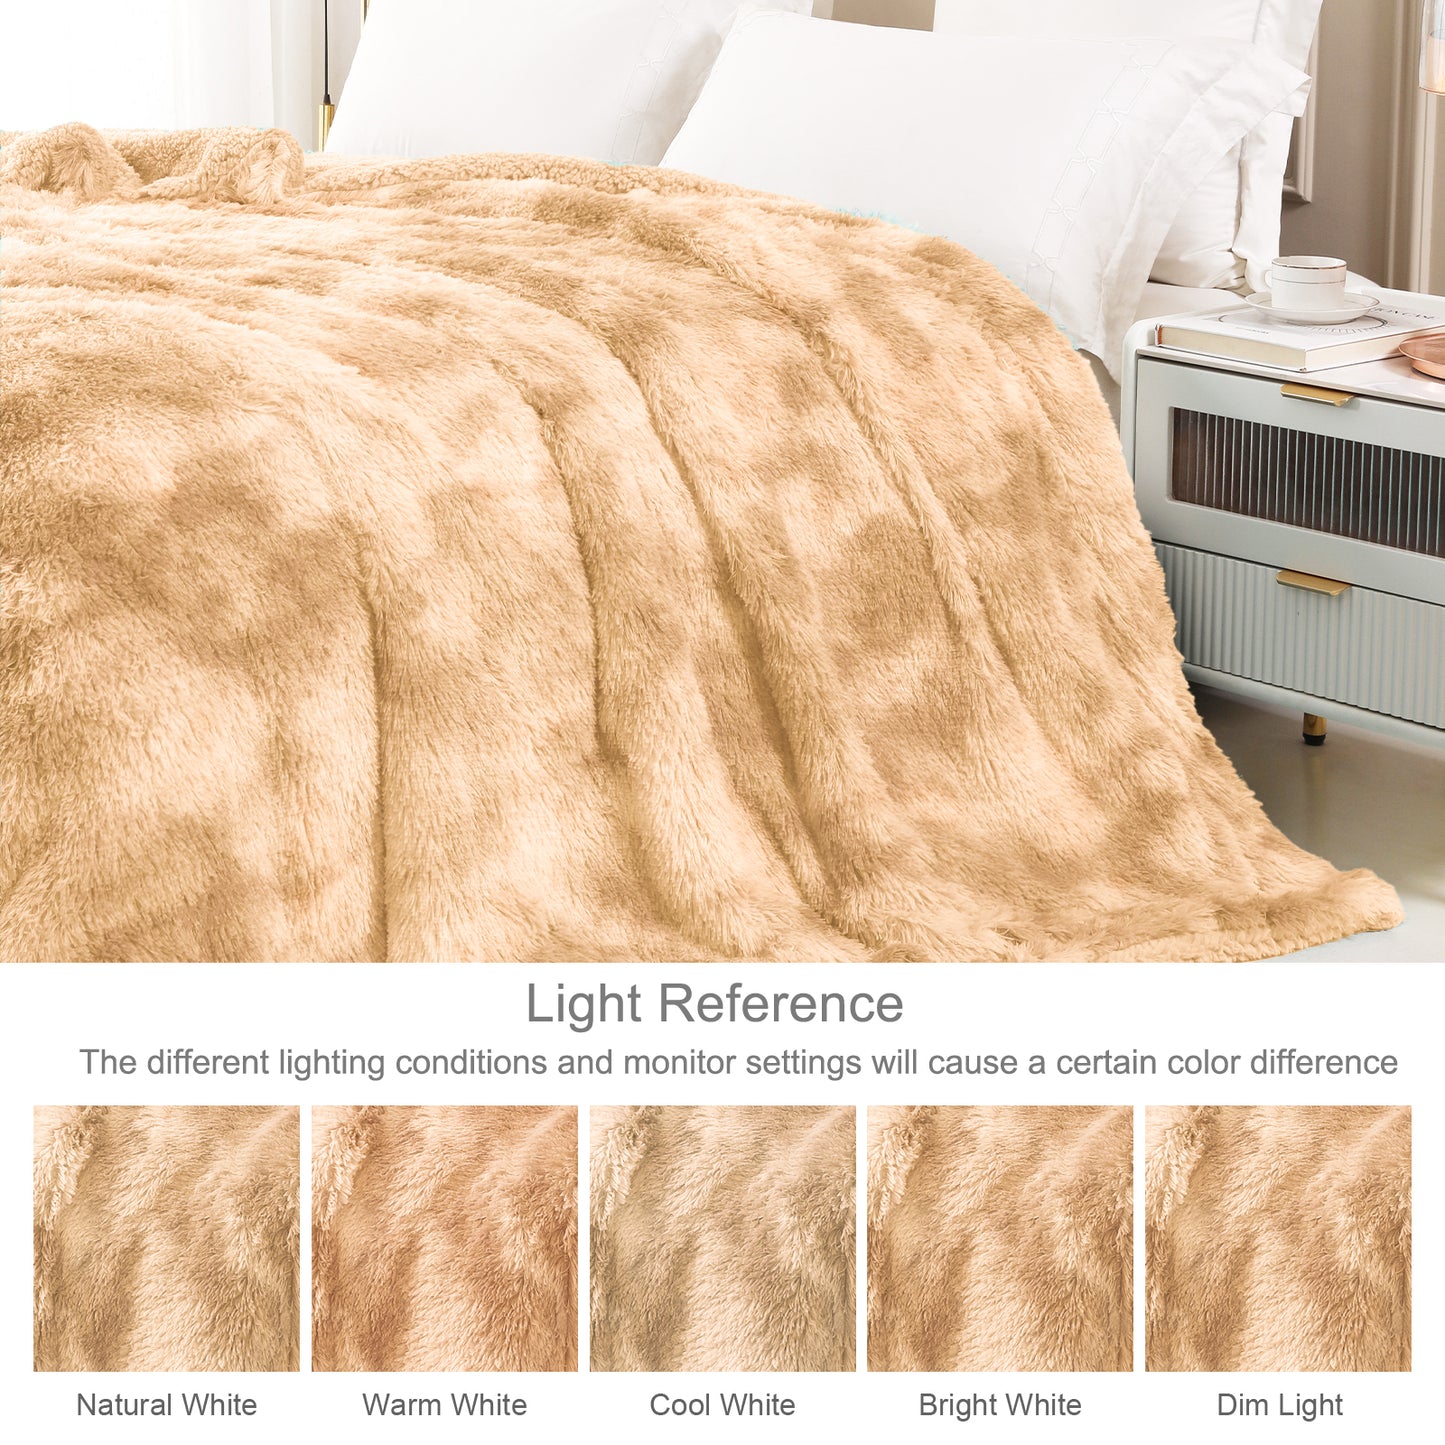 Exclusivo Mezcla Twin Size Faux Fur Bed Blanket, Super Soft Fuzzy and Plush Reversible Sherpa Fleece Blanket and Warm Blankets for Bed, Sofa, Travel, 60X80 inches, Camel